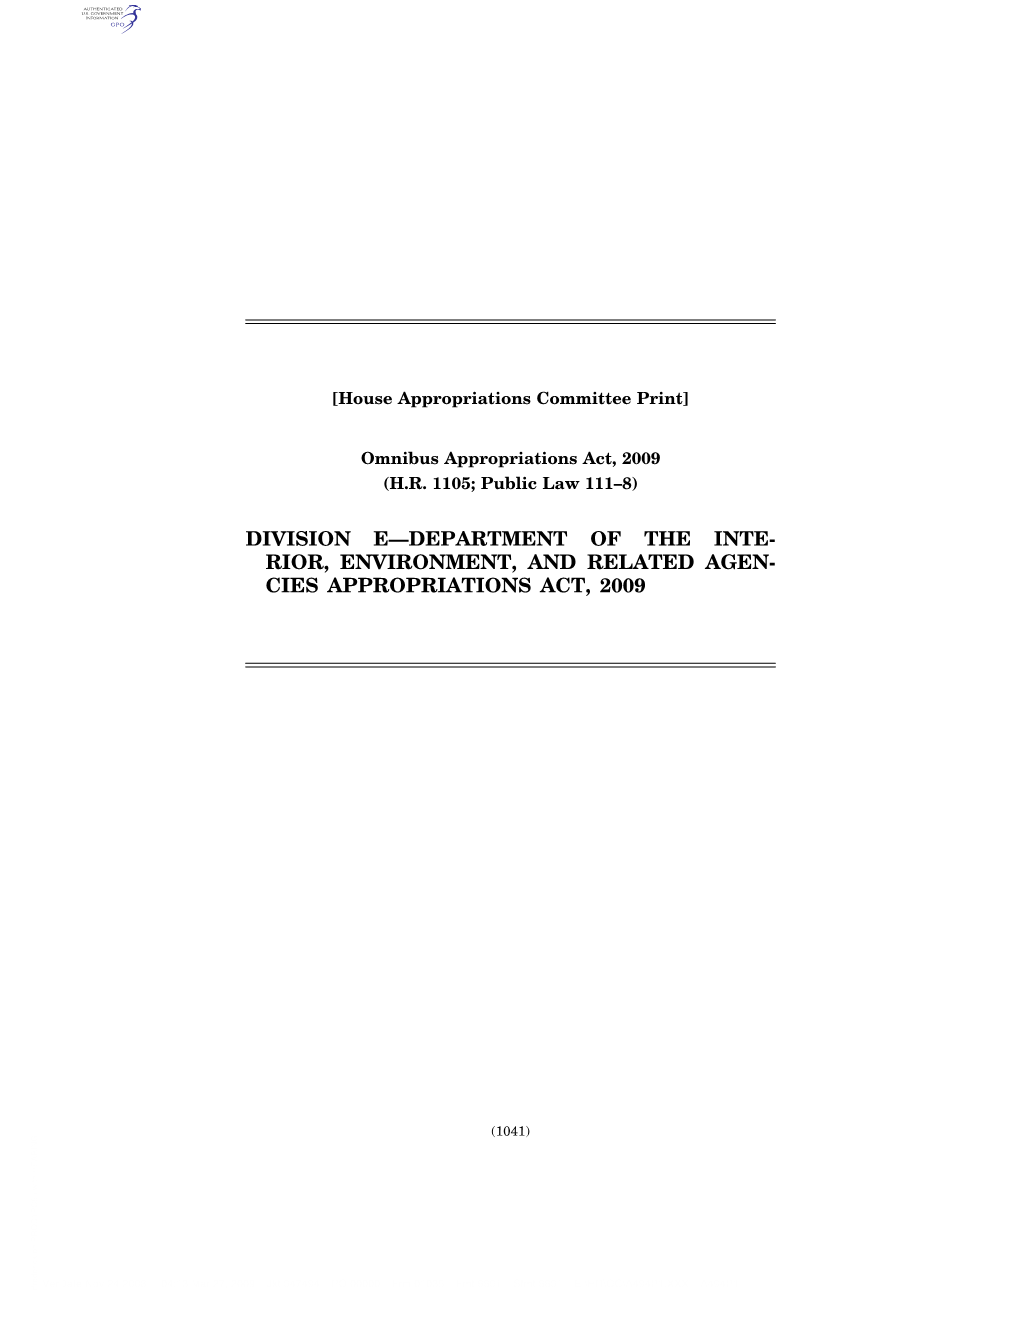 Division E—Department of the Inte- Rior, Environment, and Related Agen- Cies Appropriations Act, 2009